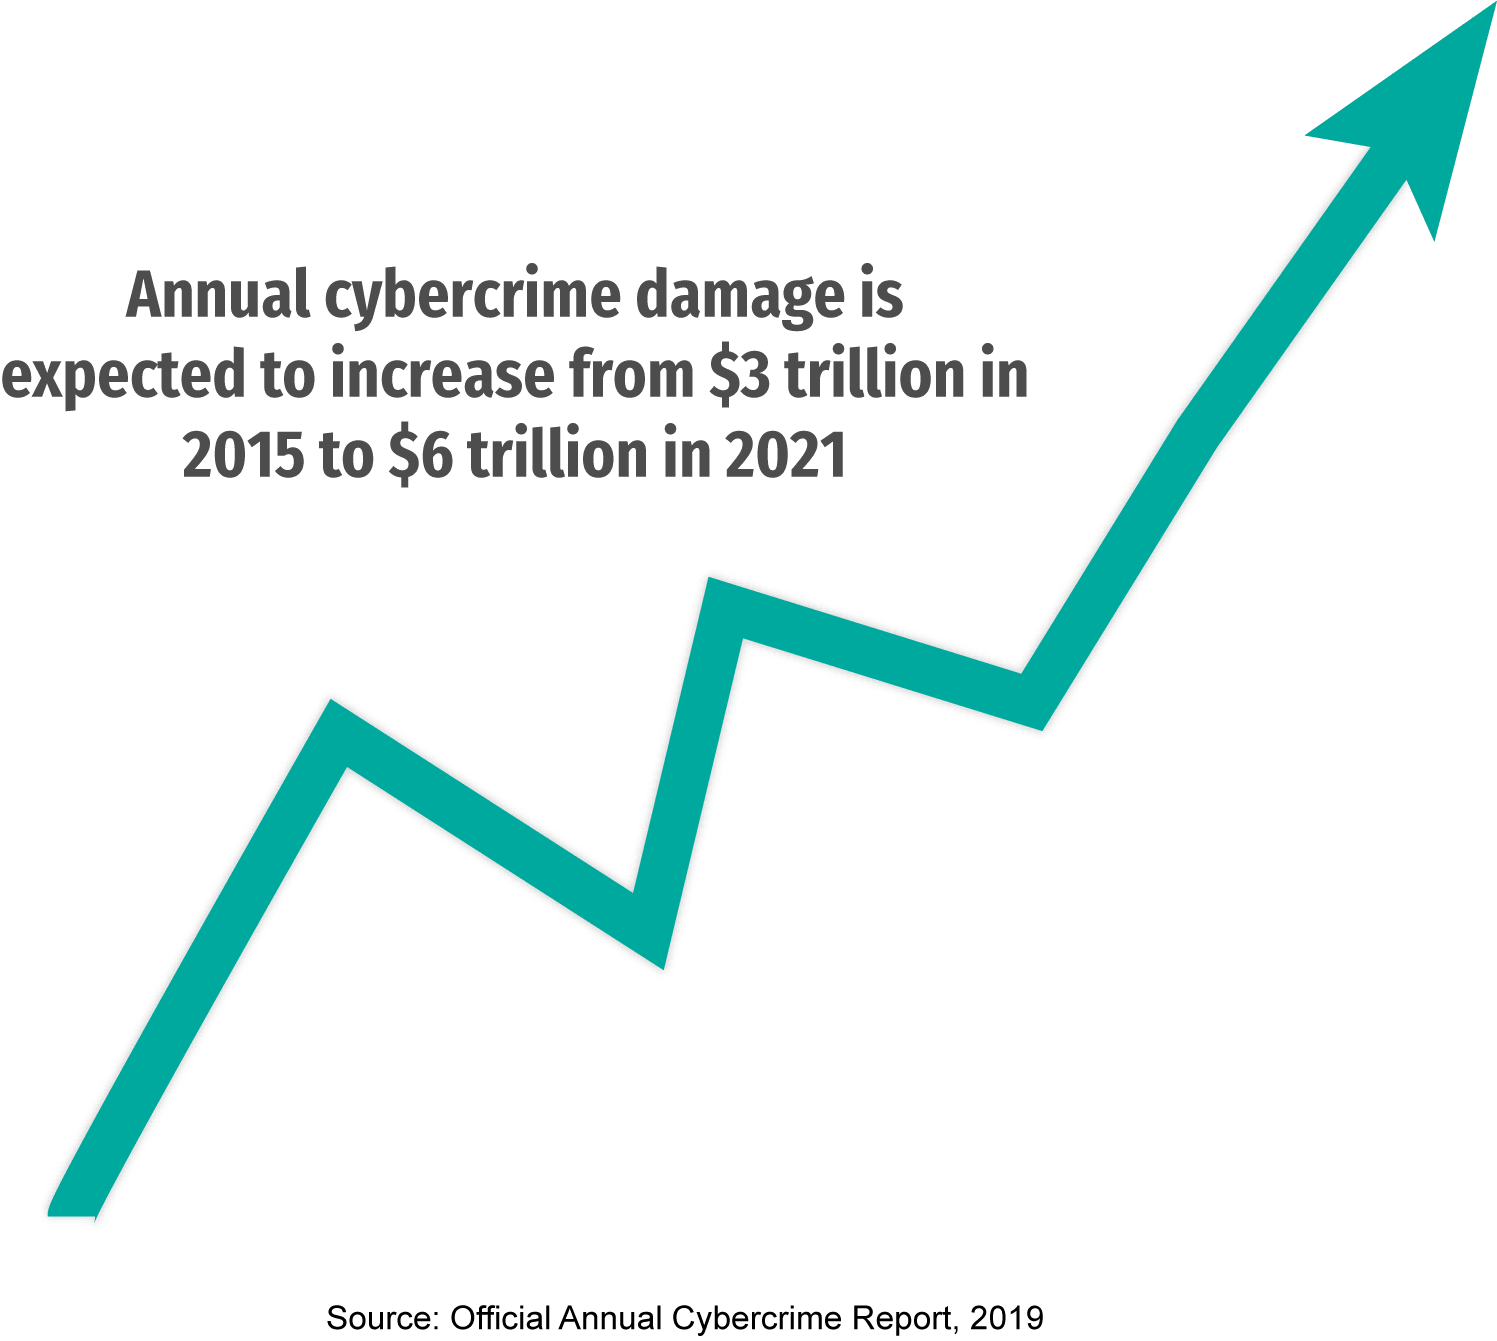  Image showing expected increase in annual cybercrime damage from 2015 to 2021.